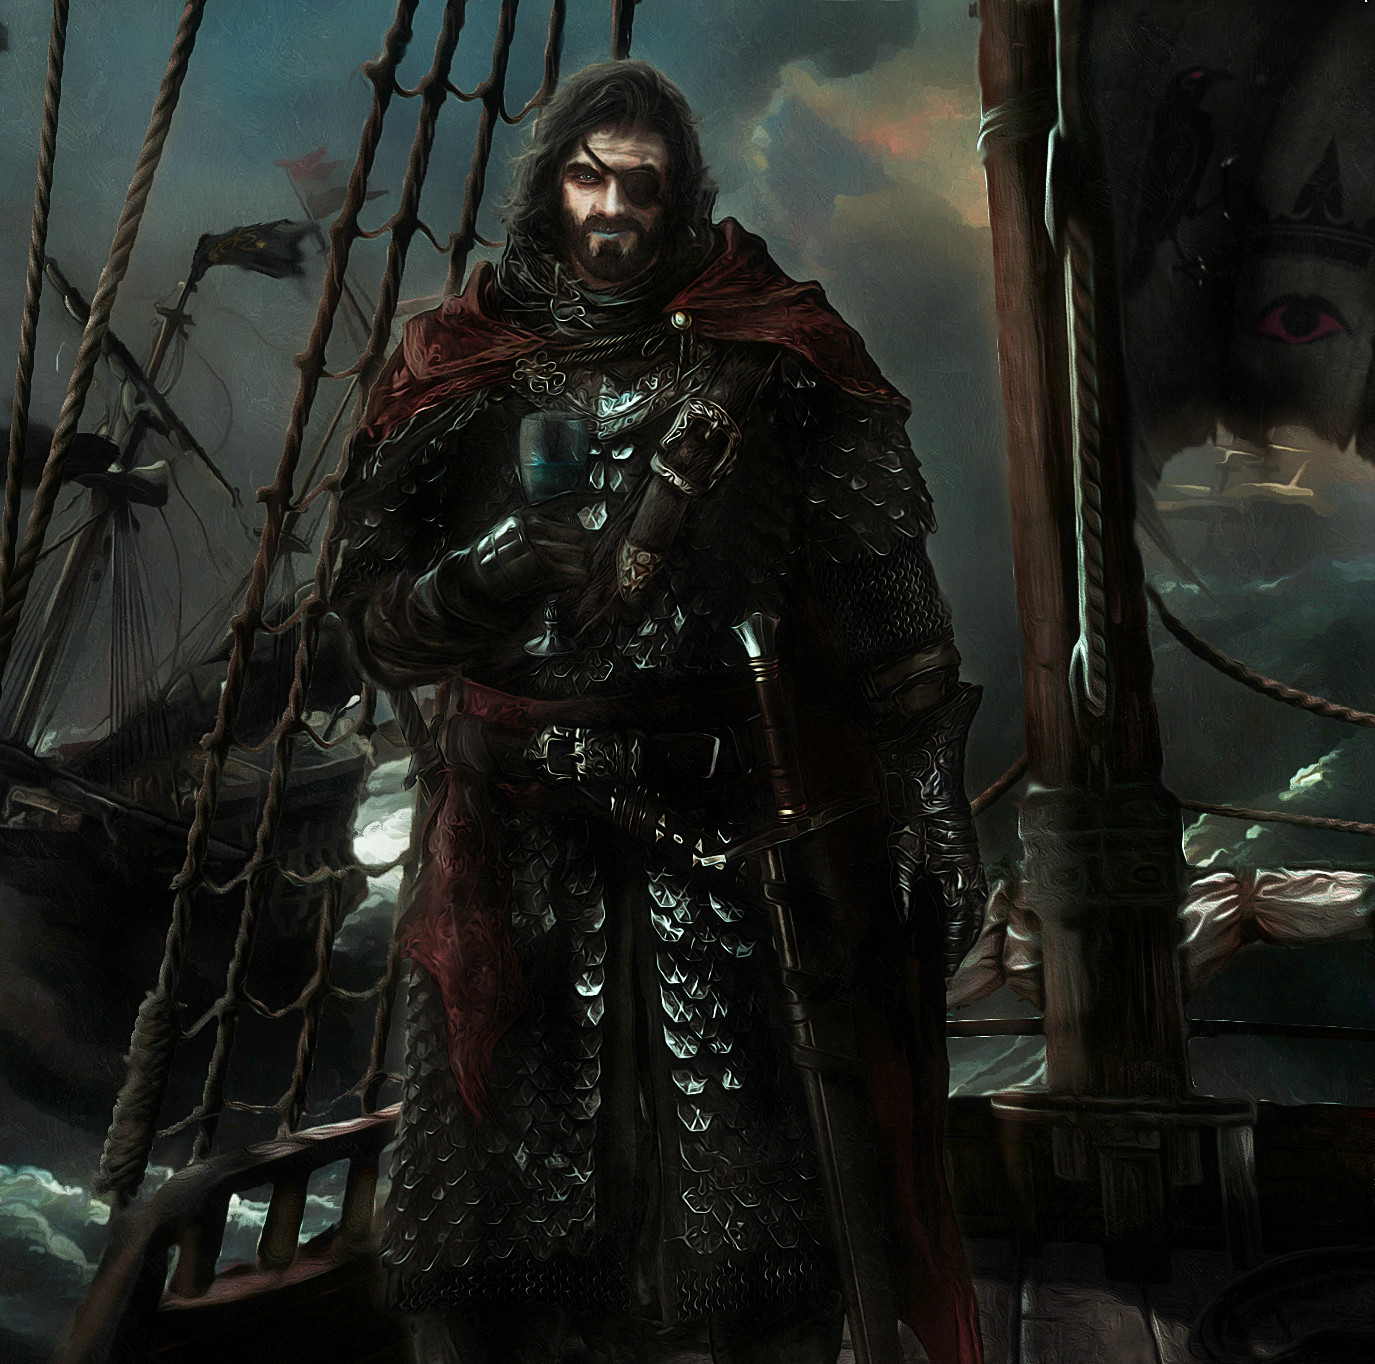 Earlier version featuring a crownless Euron alongside a flag displaying his personal coat of arms. 